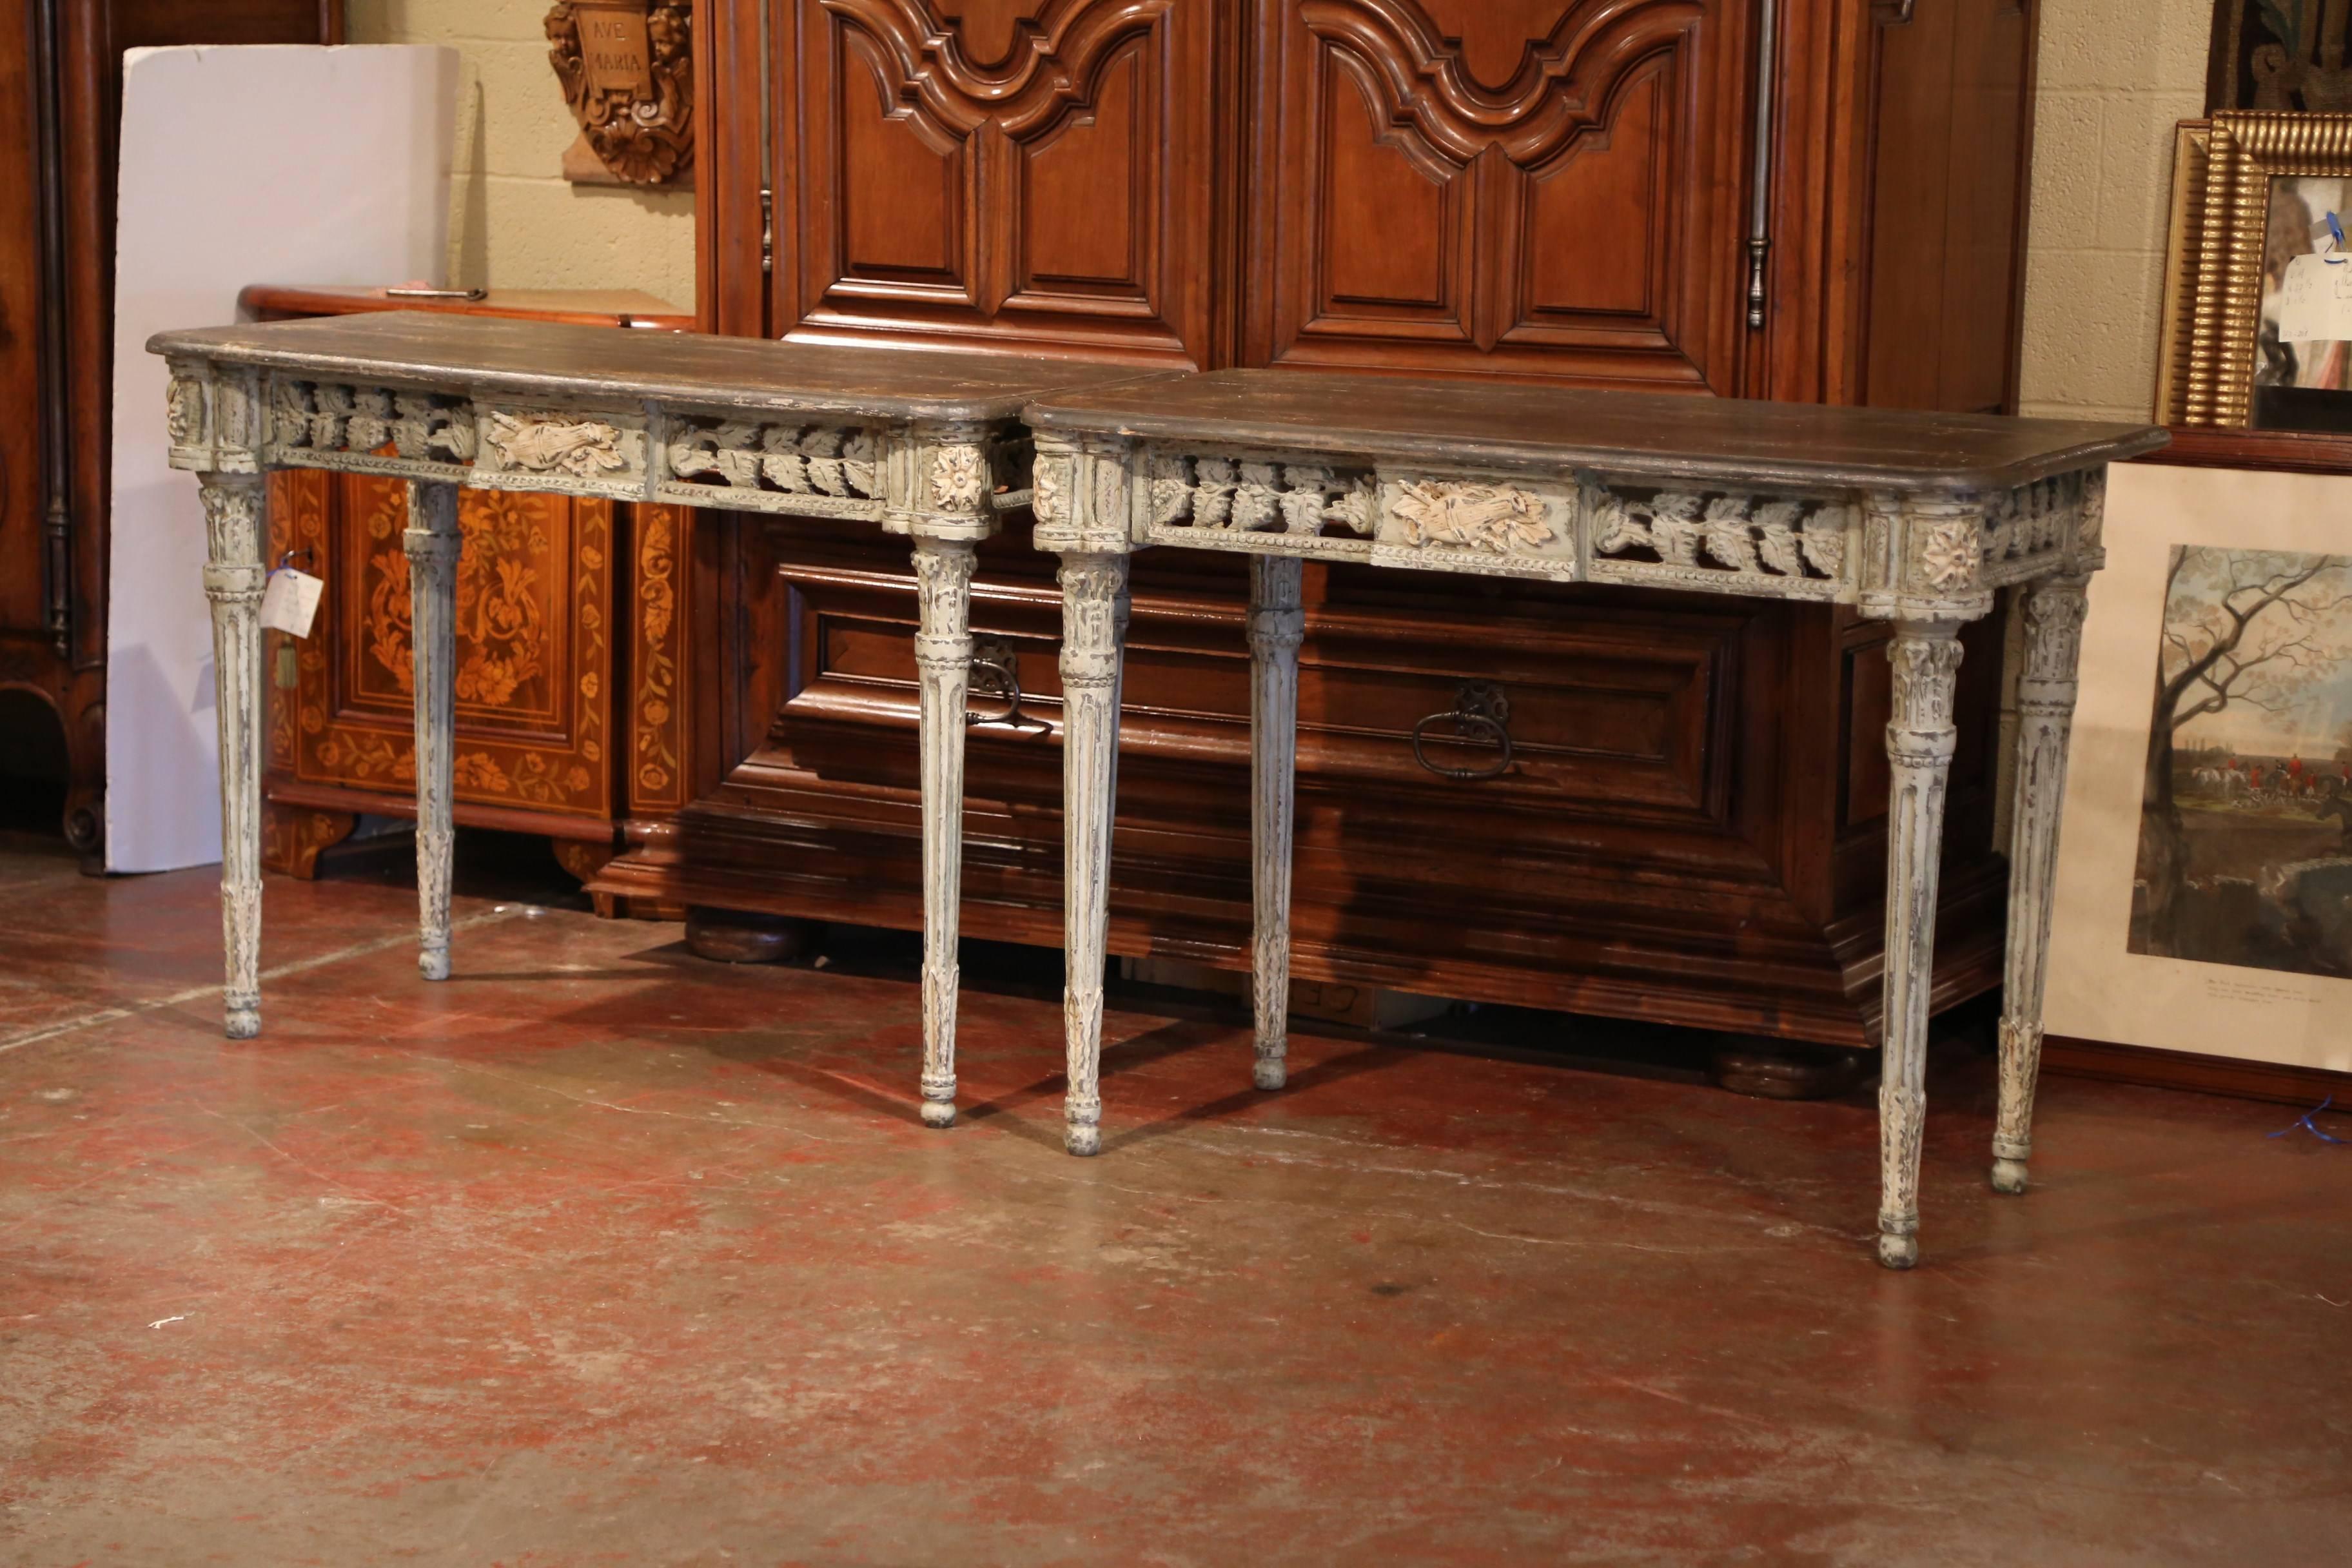 This elegant pair of antique, painted consoles was crafted in the southwest part of France using old elements. Each table features four tapered legs with acanthus leaves at the bottom, round corners with flowers medallions and delicate carvings